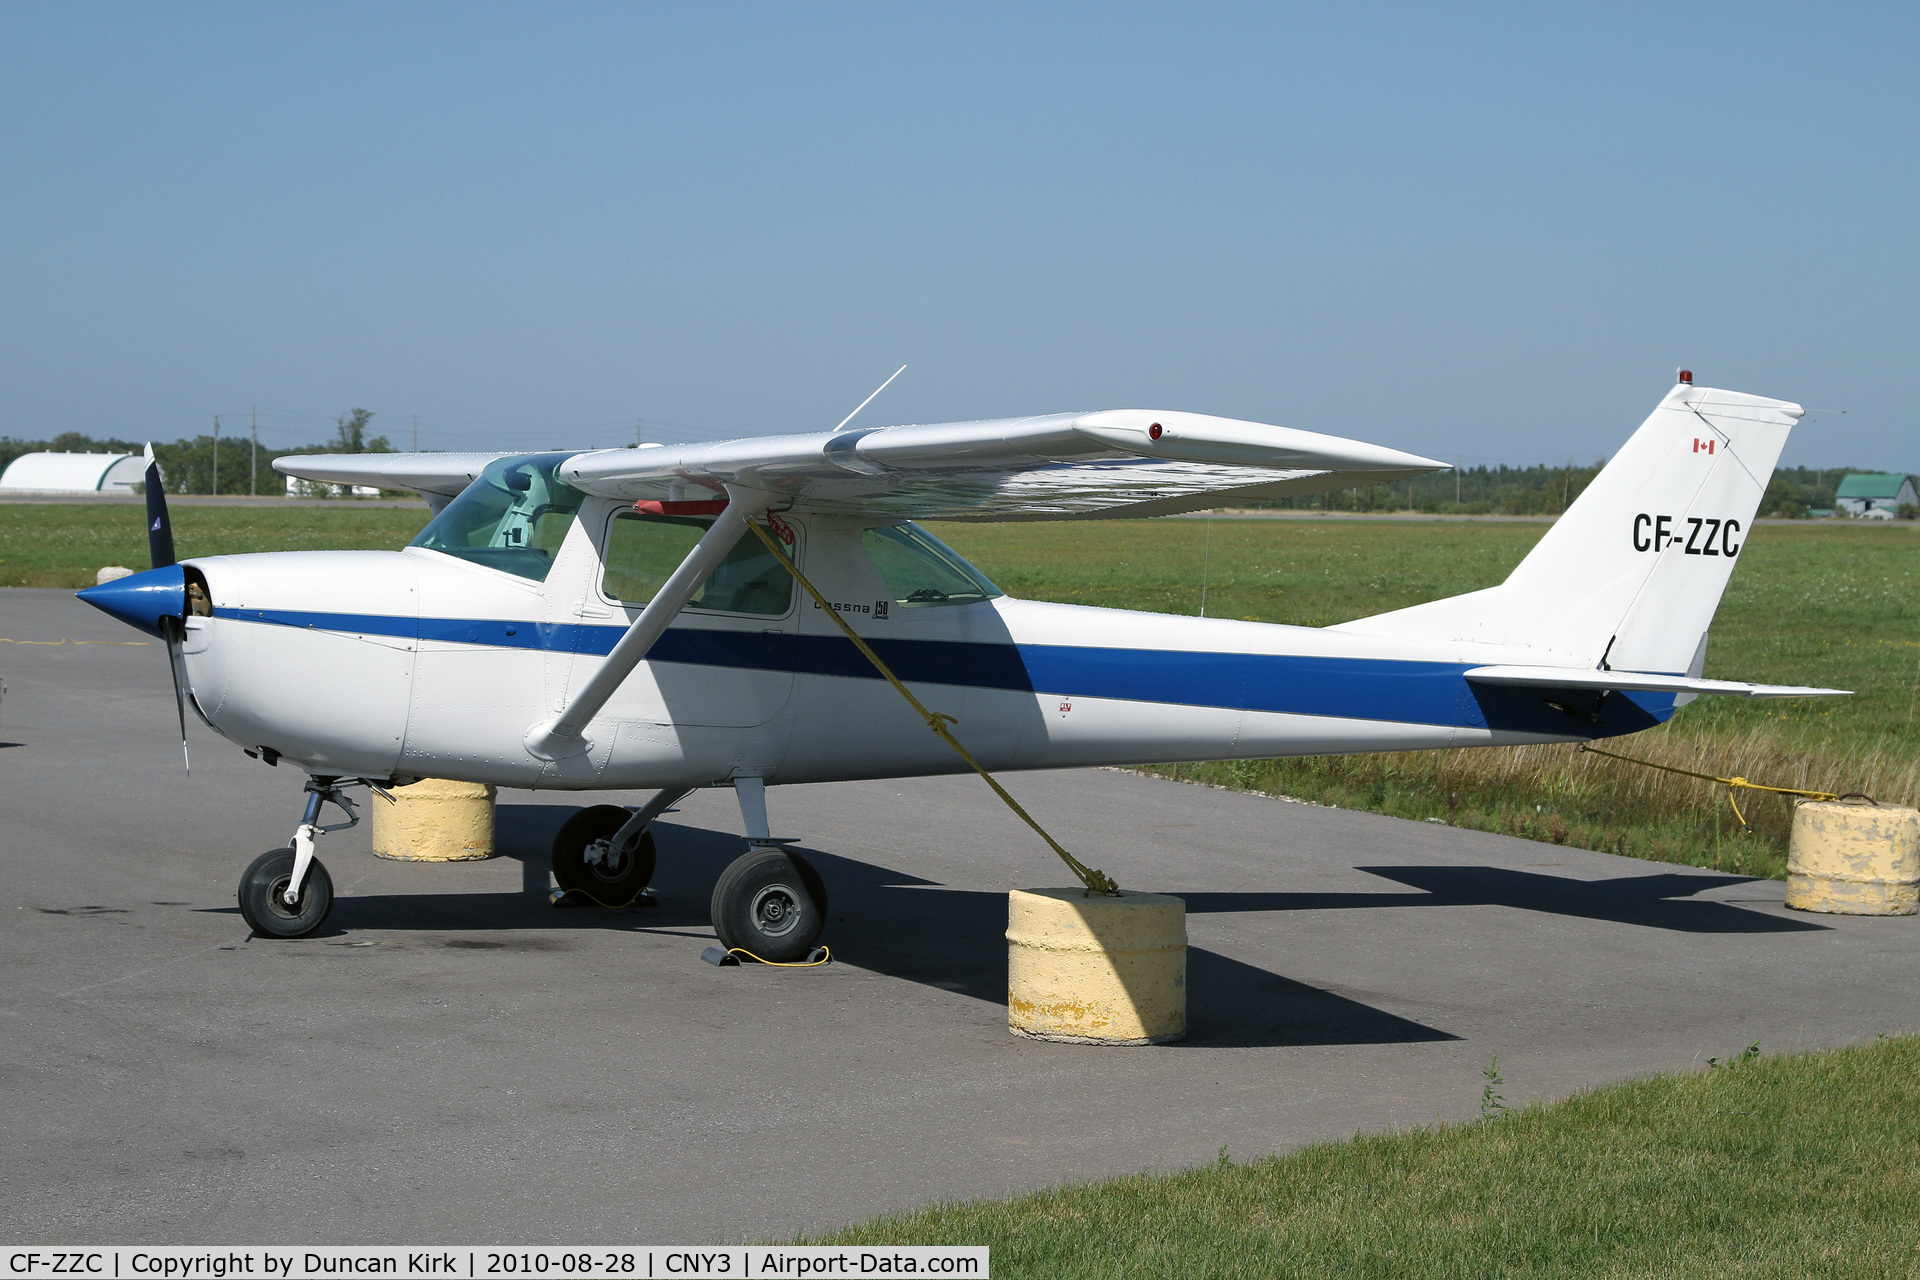 CF-ZZC, 1968 Cessna 150H C/N 15067241, Not too many CF- aircraft around these days